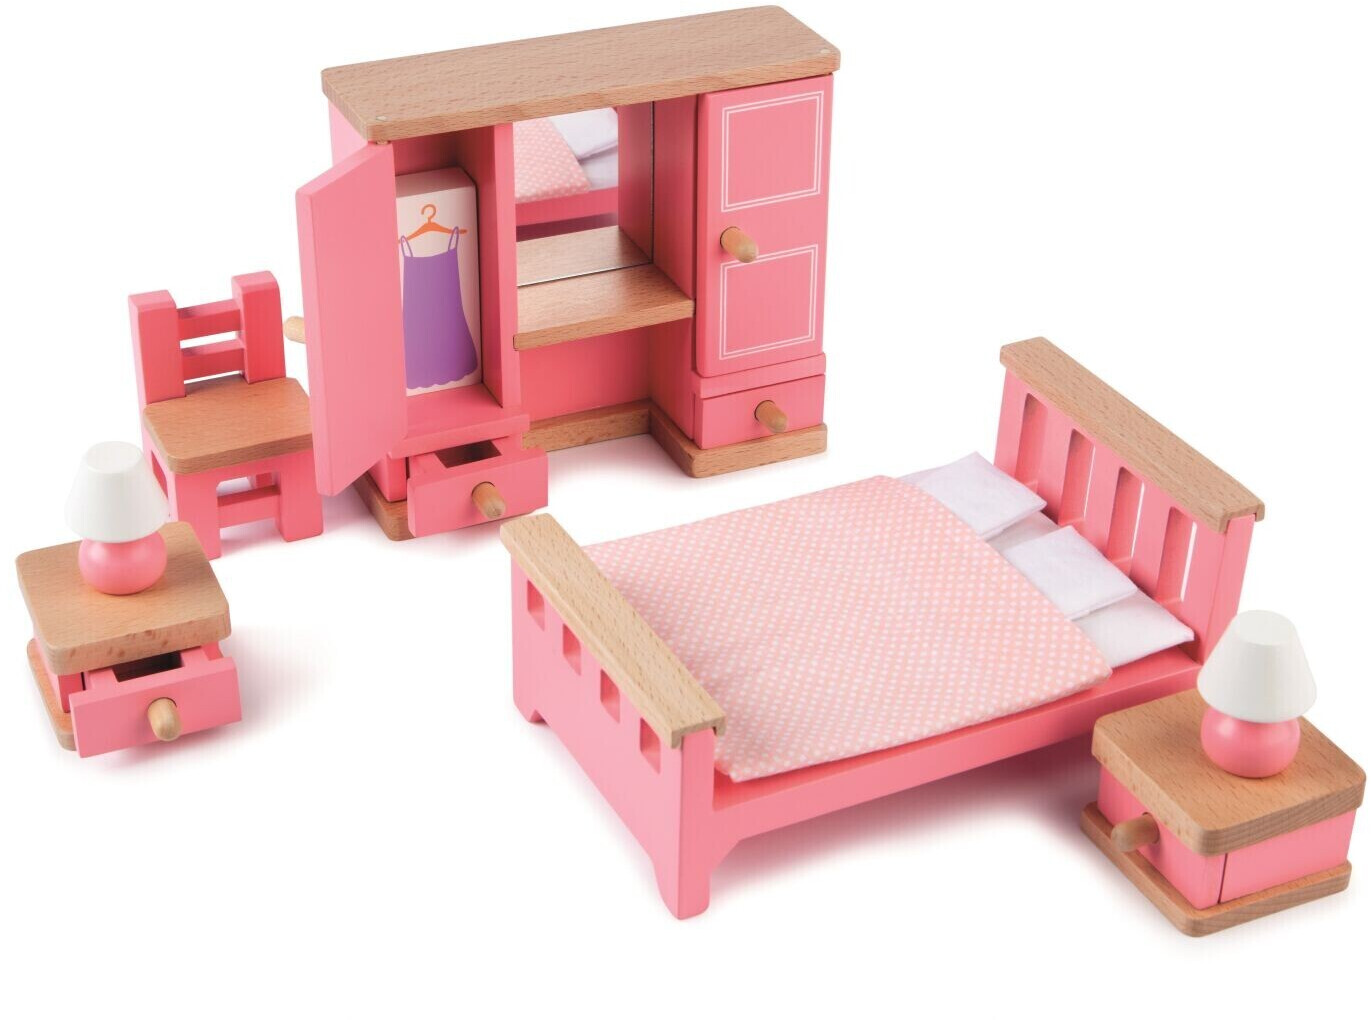 Photos - Doll Accessories Tidlo Bedroom forniture set pink T-0221 